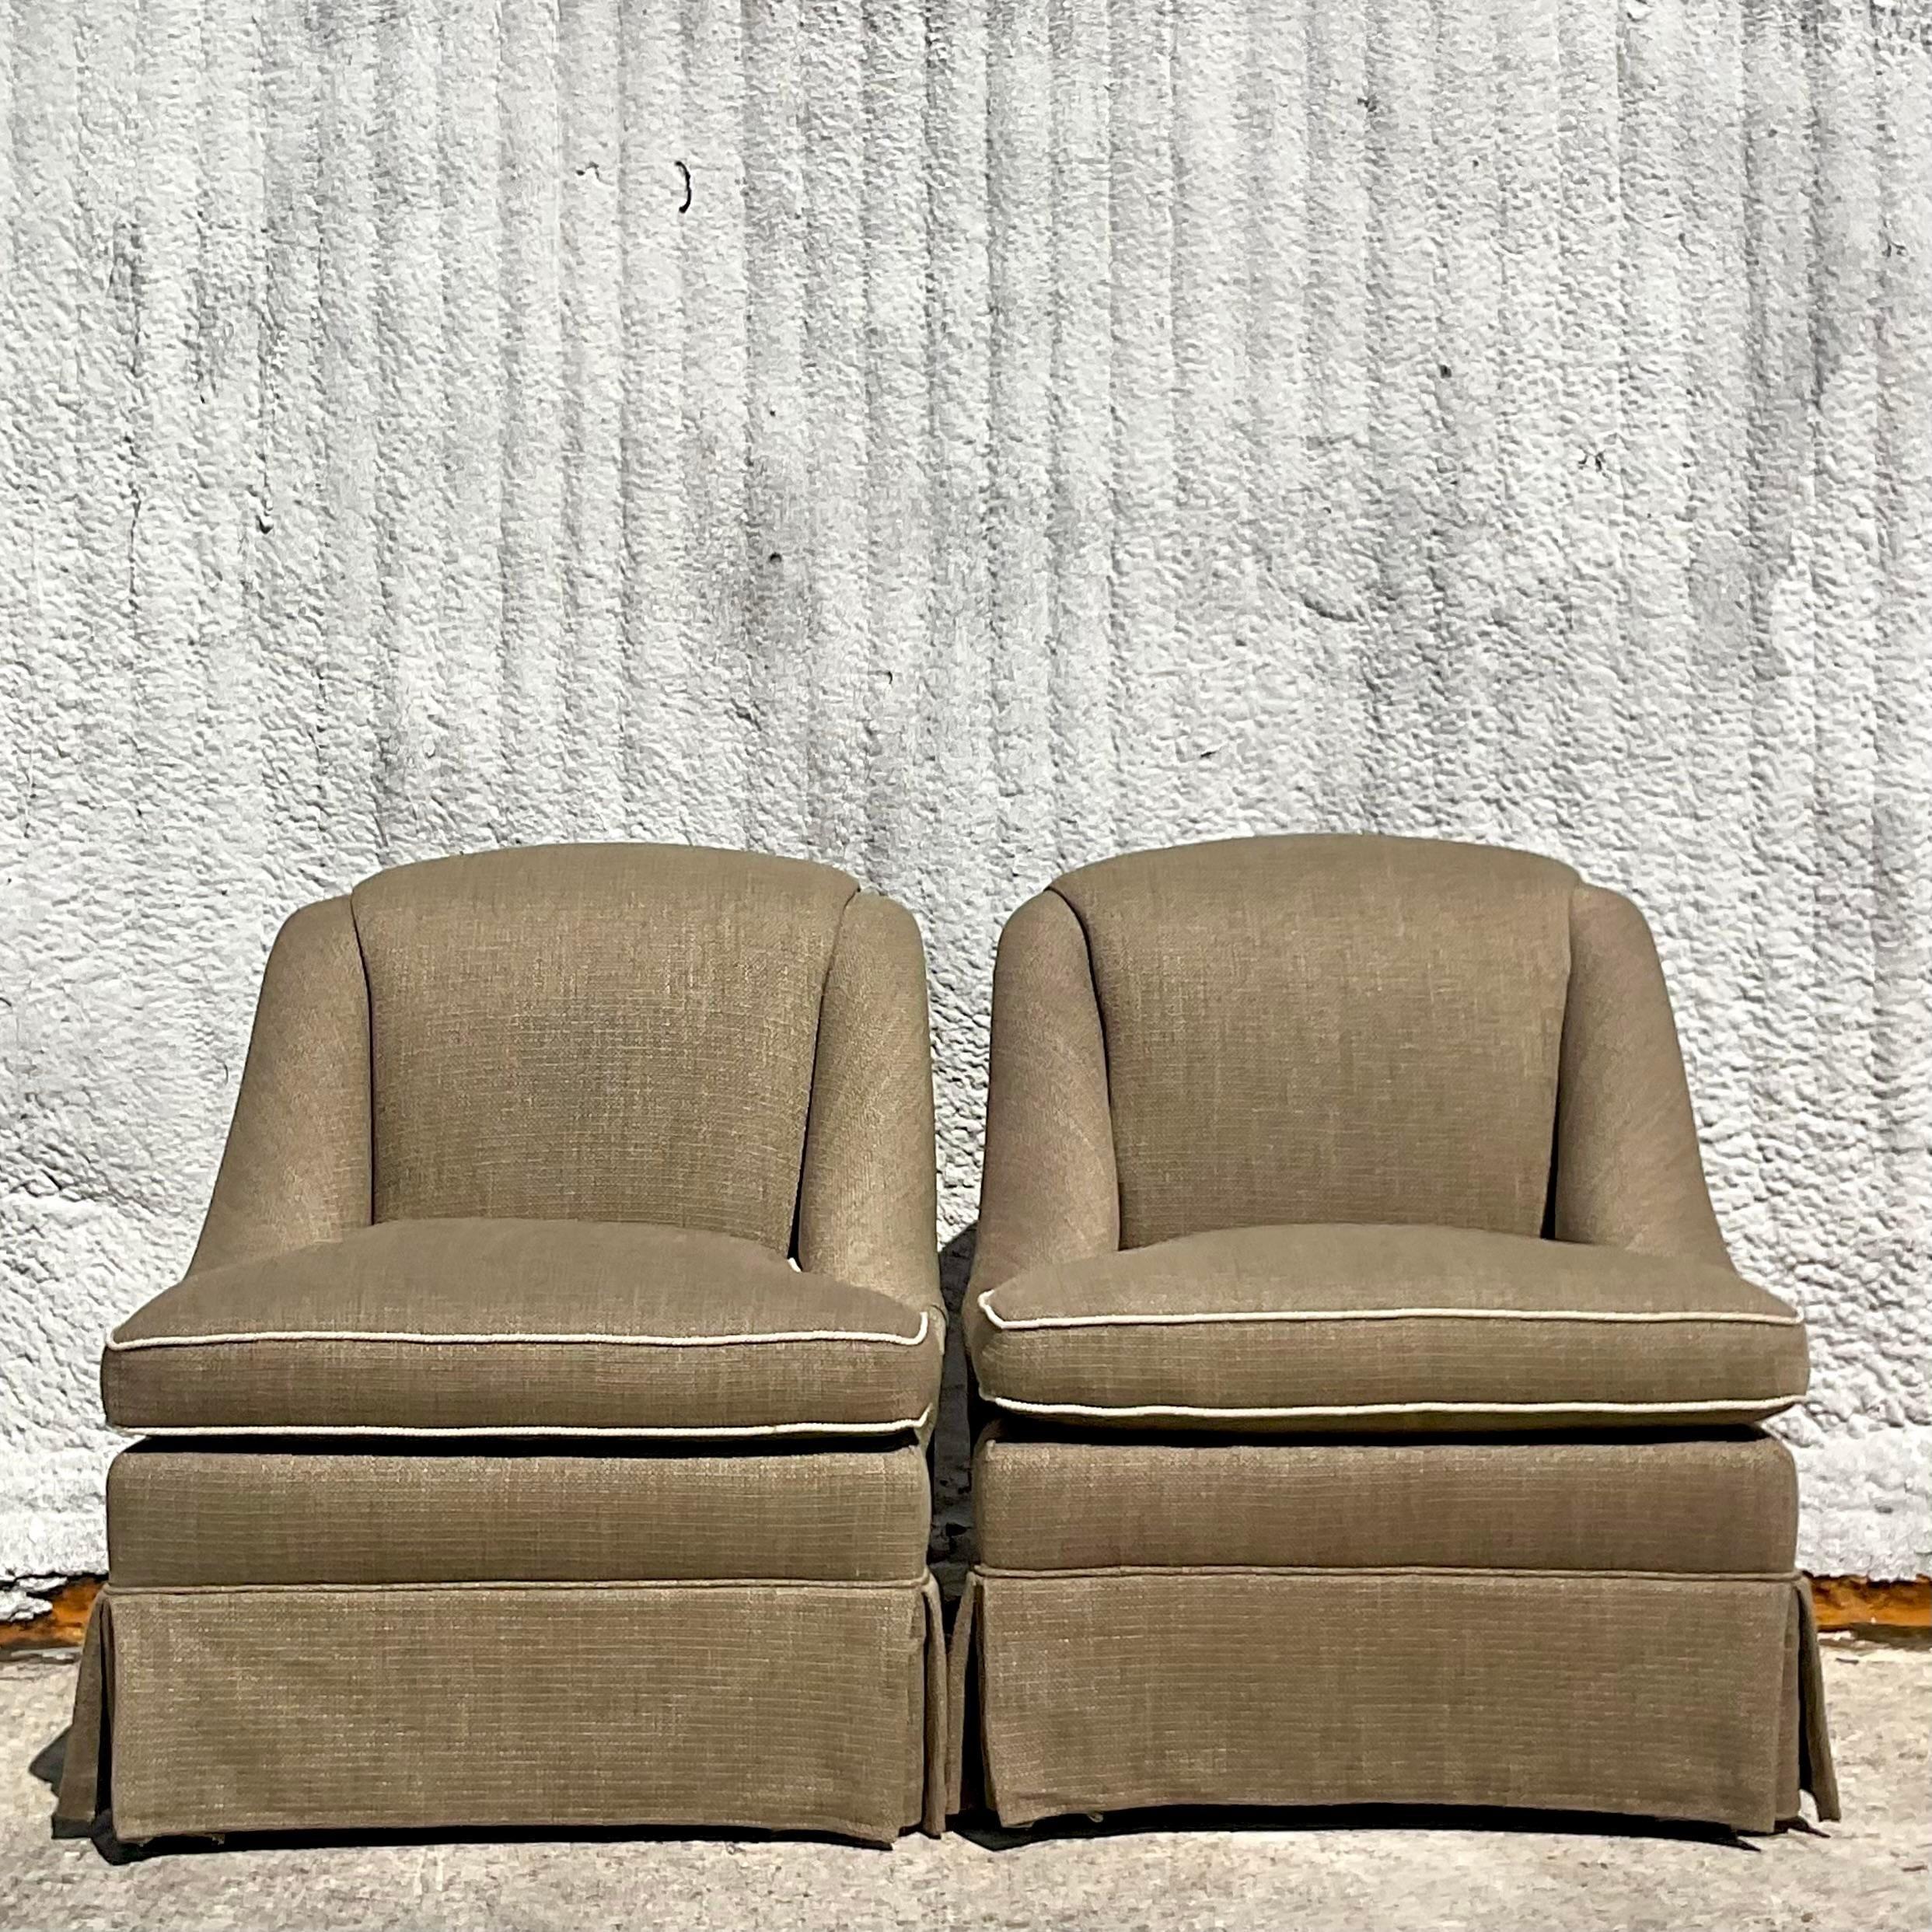 20th Century Vintage Regency Tipped Lounge Chairs - a Pair